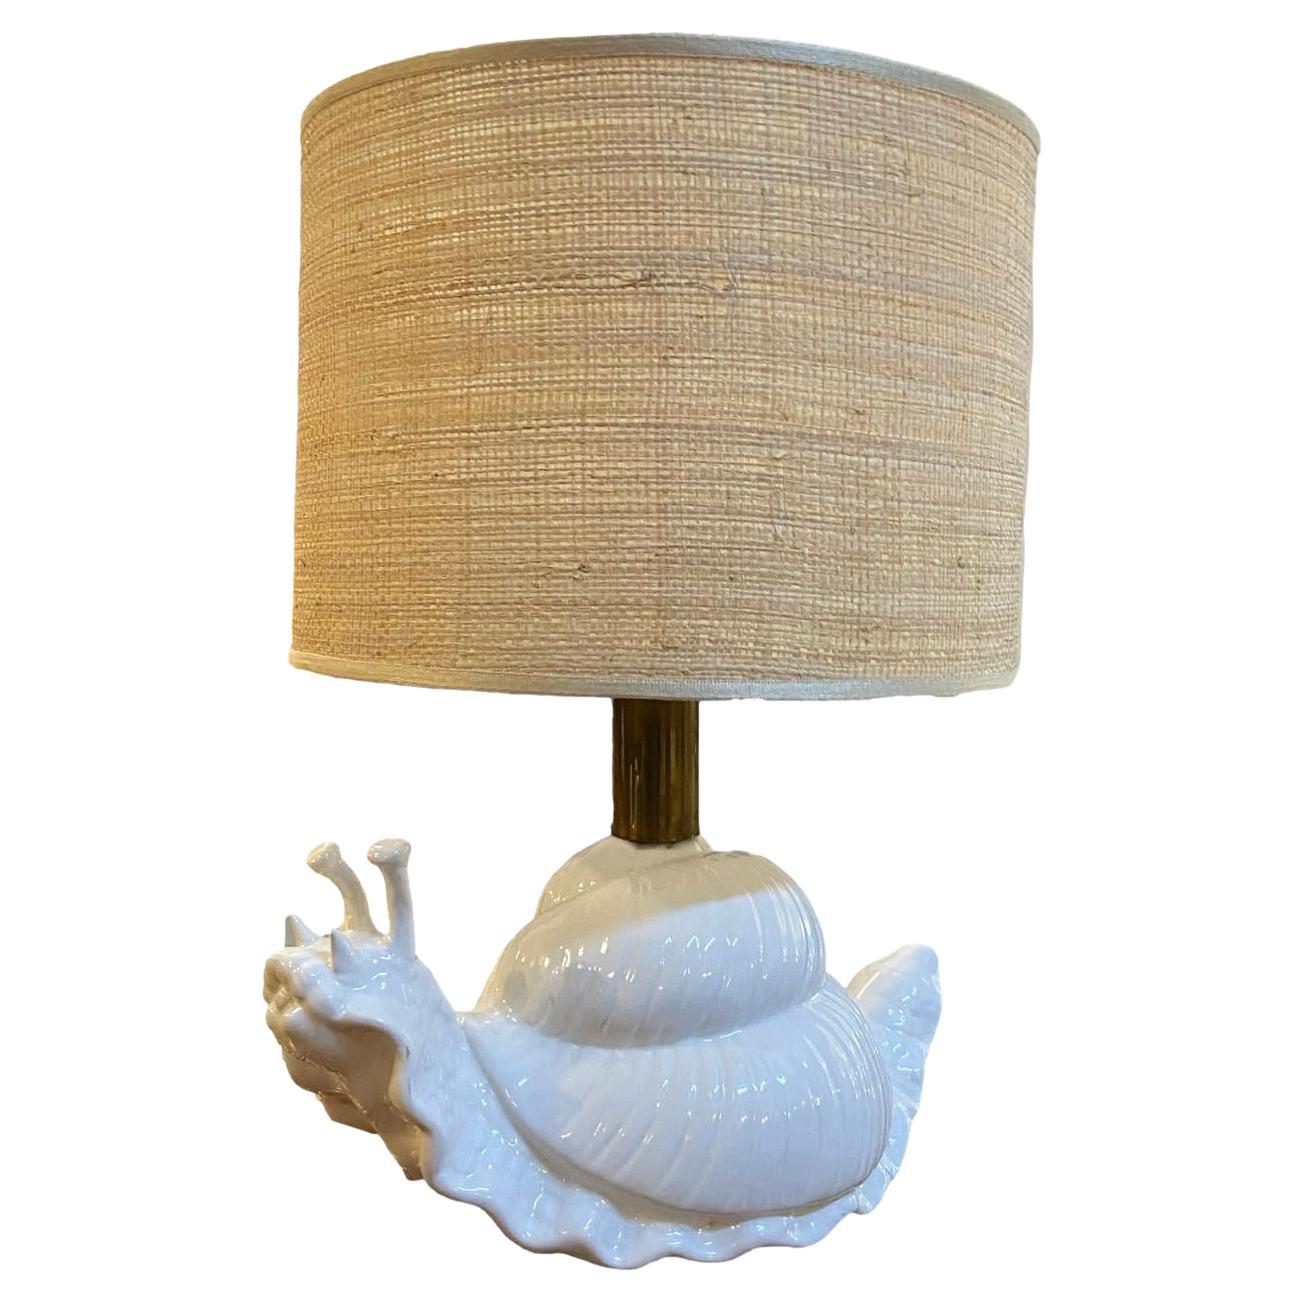 Vivai del Sud Style Ceramic Snail Table Lamp, Italy, 1960s